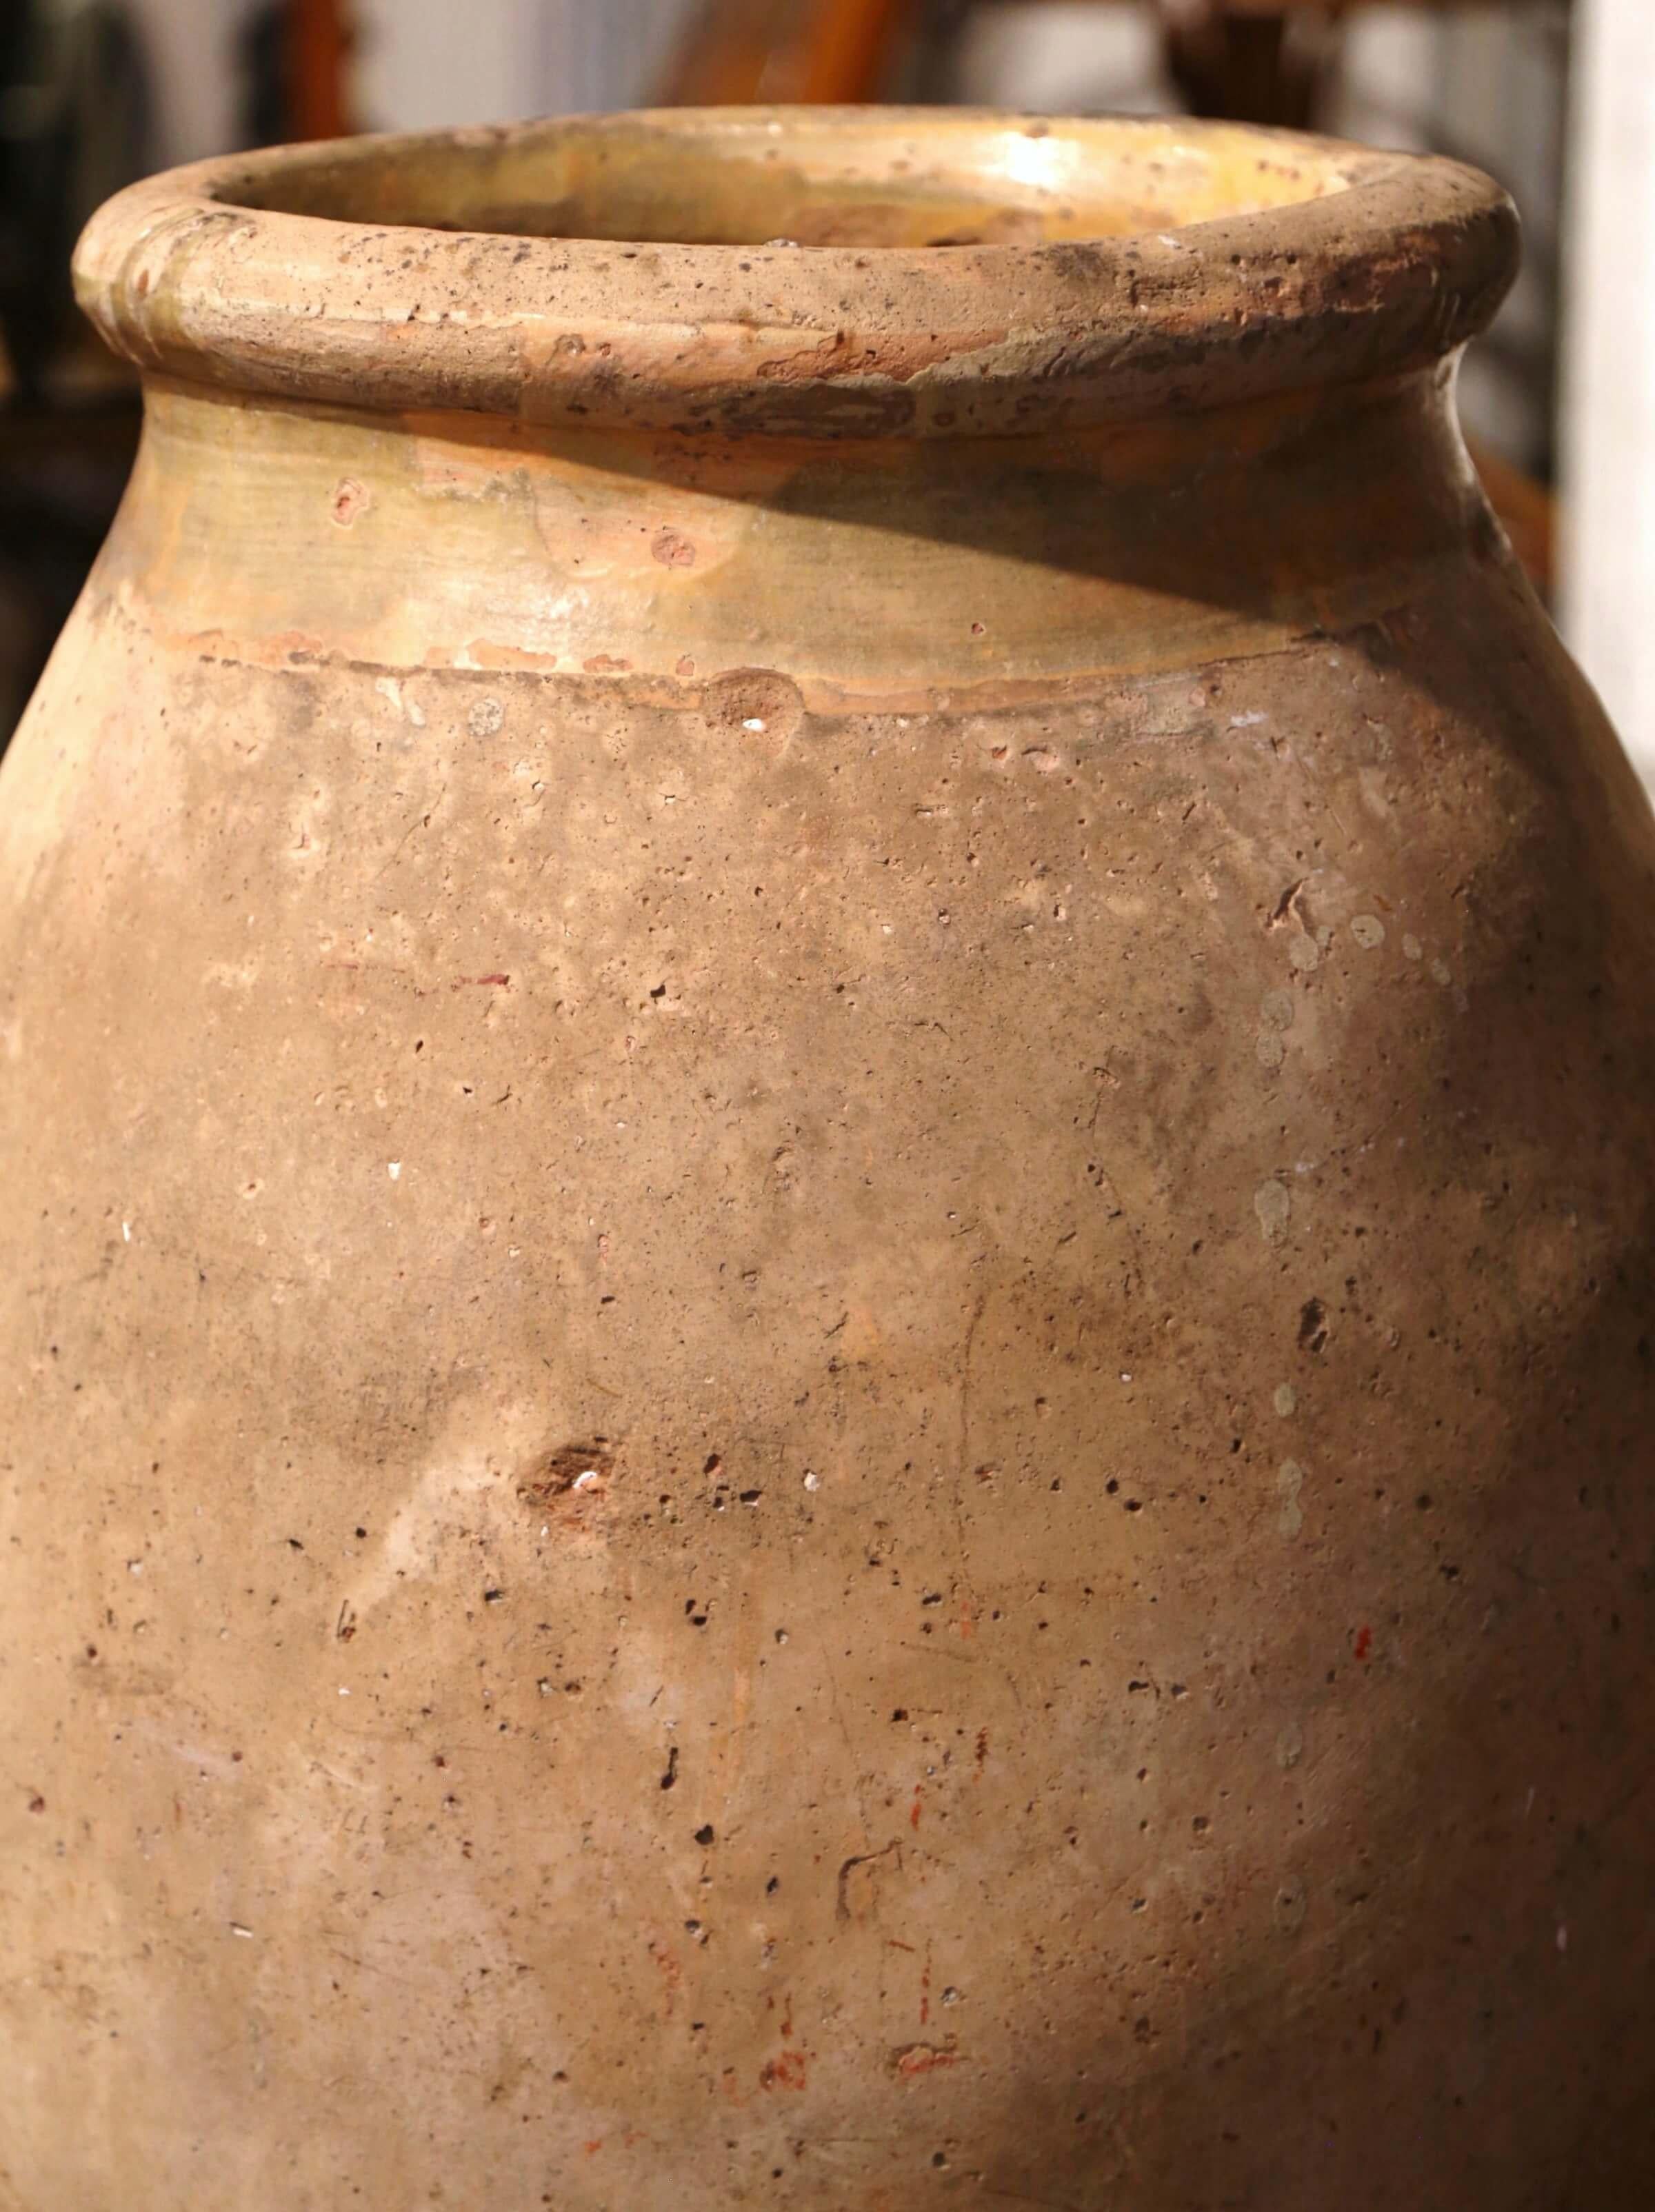 This large, antique earthenware olive jar was created in Southern France, circa 1760. Made of blond clay and neutral in color, the terracotta vase has a traditional round shape. The rustic, time-worn pot features a yellow glaze around the neck and